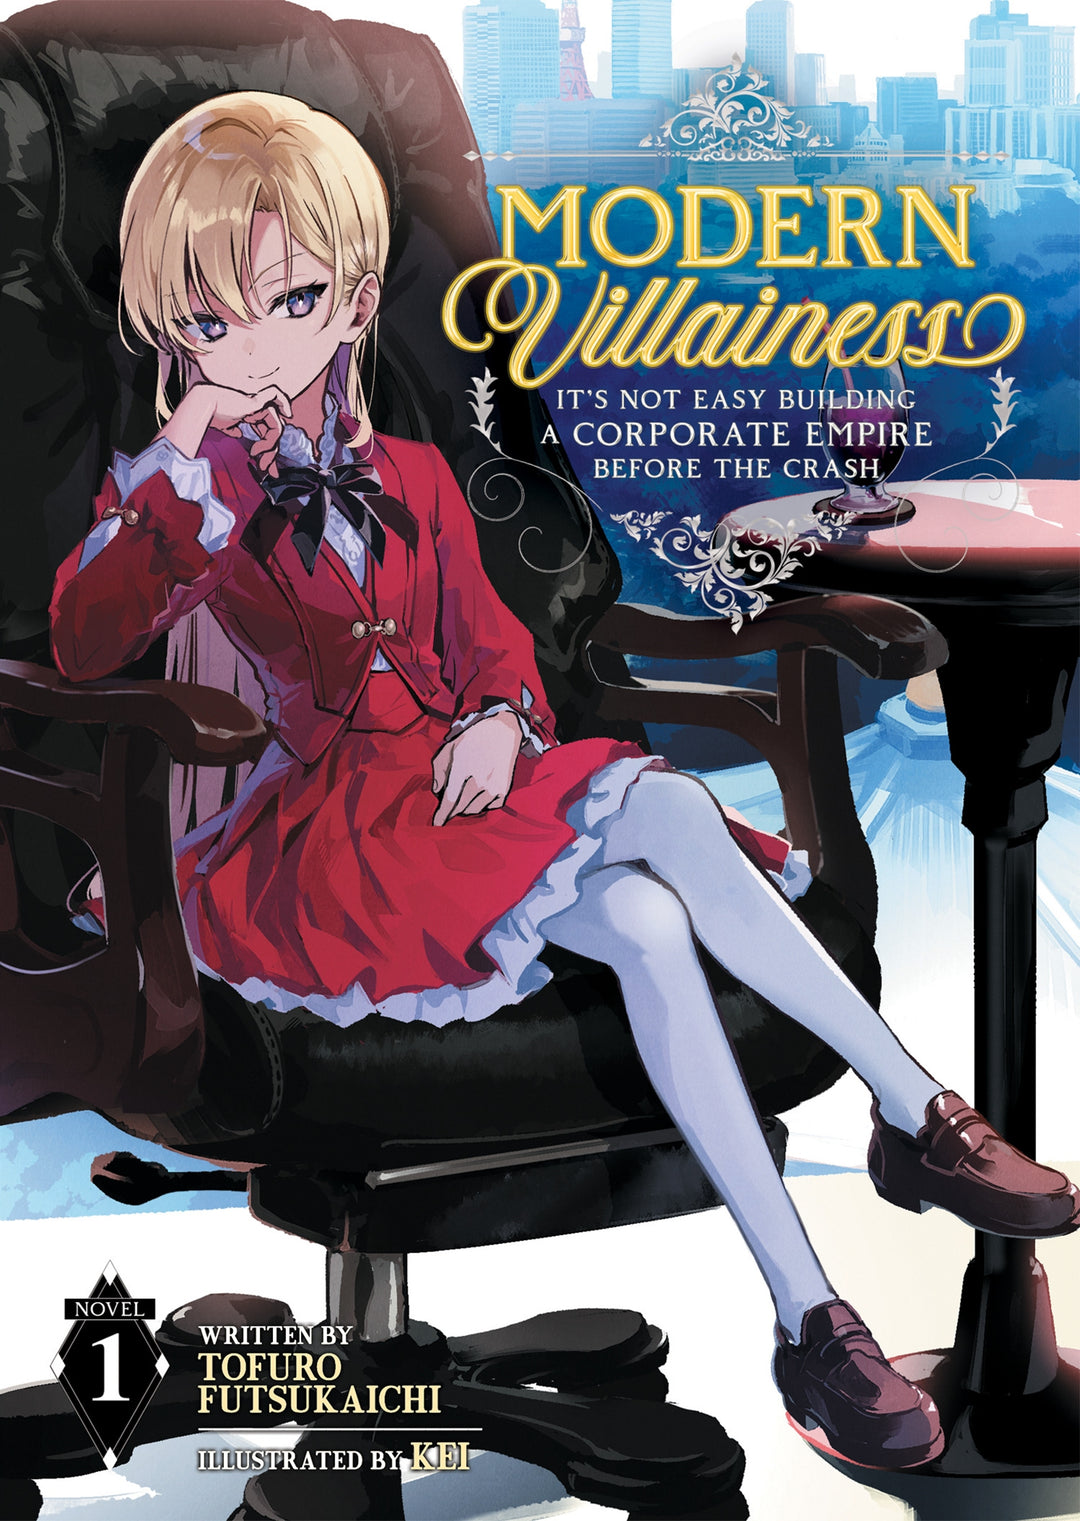 Modern Villainess: It's Not Easy Building a Corporate Empire Before the Crash (Light Novel), Vol. 01